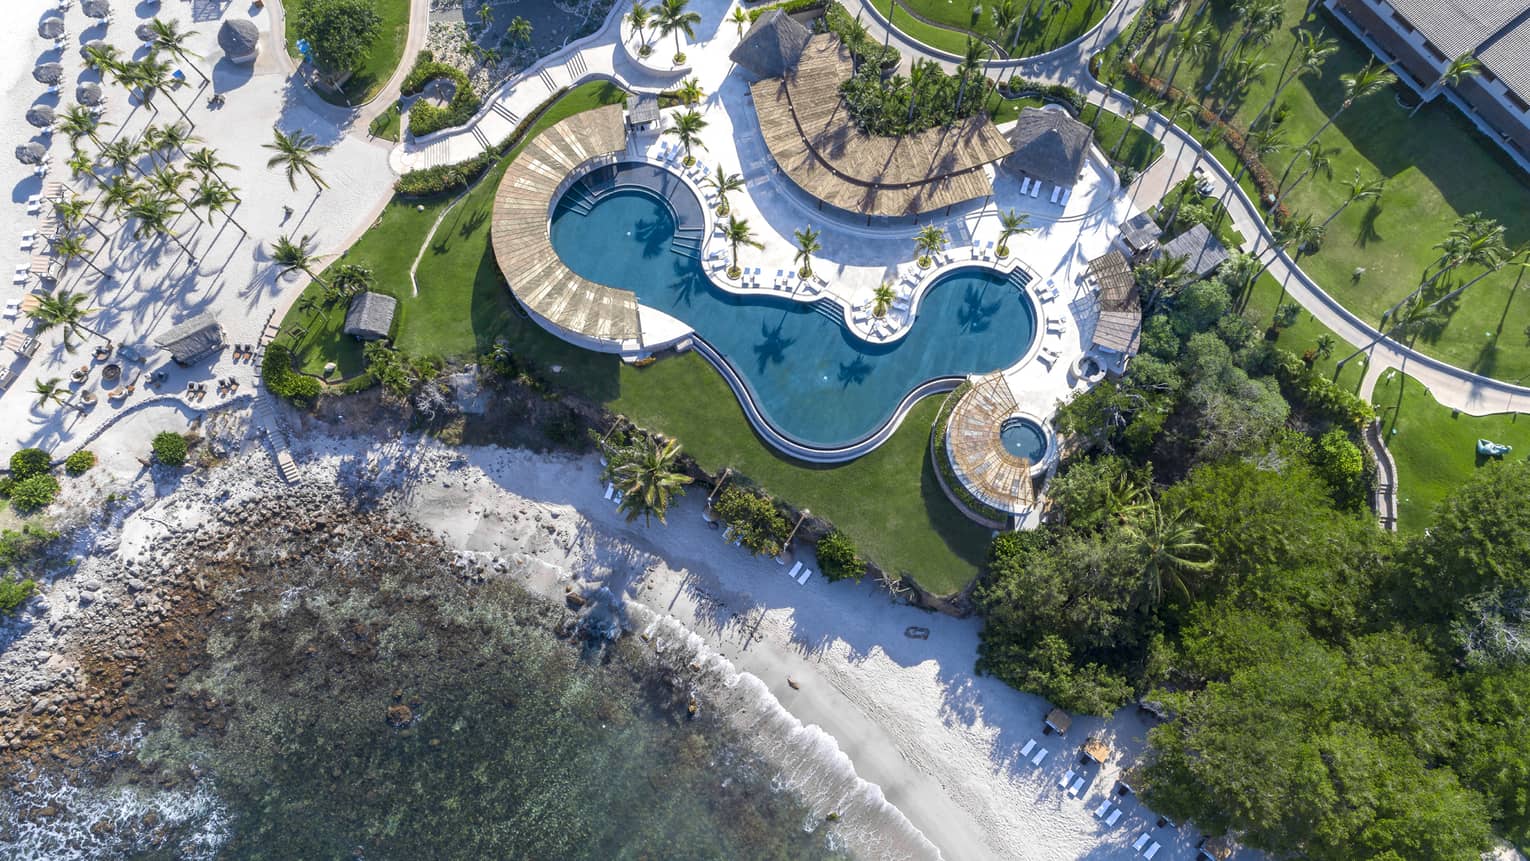 An overhead view of a hotel with a large pool near a beach shore.